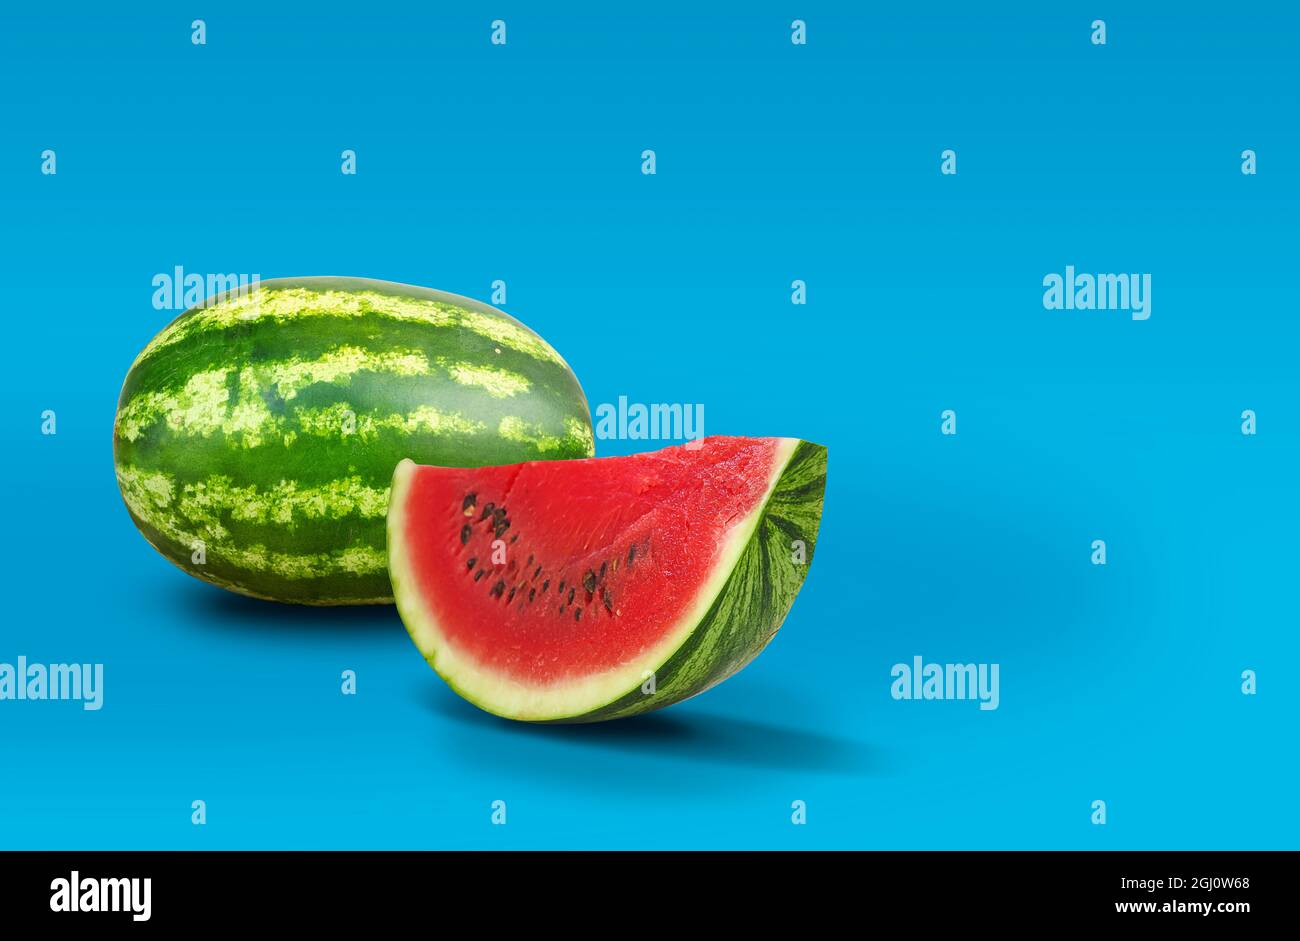 Ripe watermelon and slice isolated on blue background with copy space Stock Photo